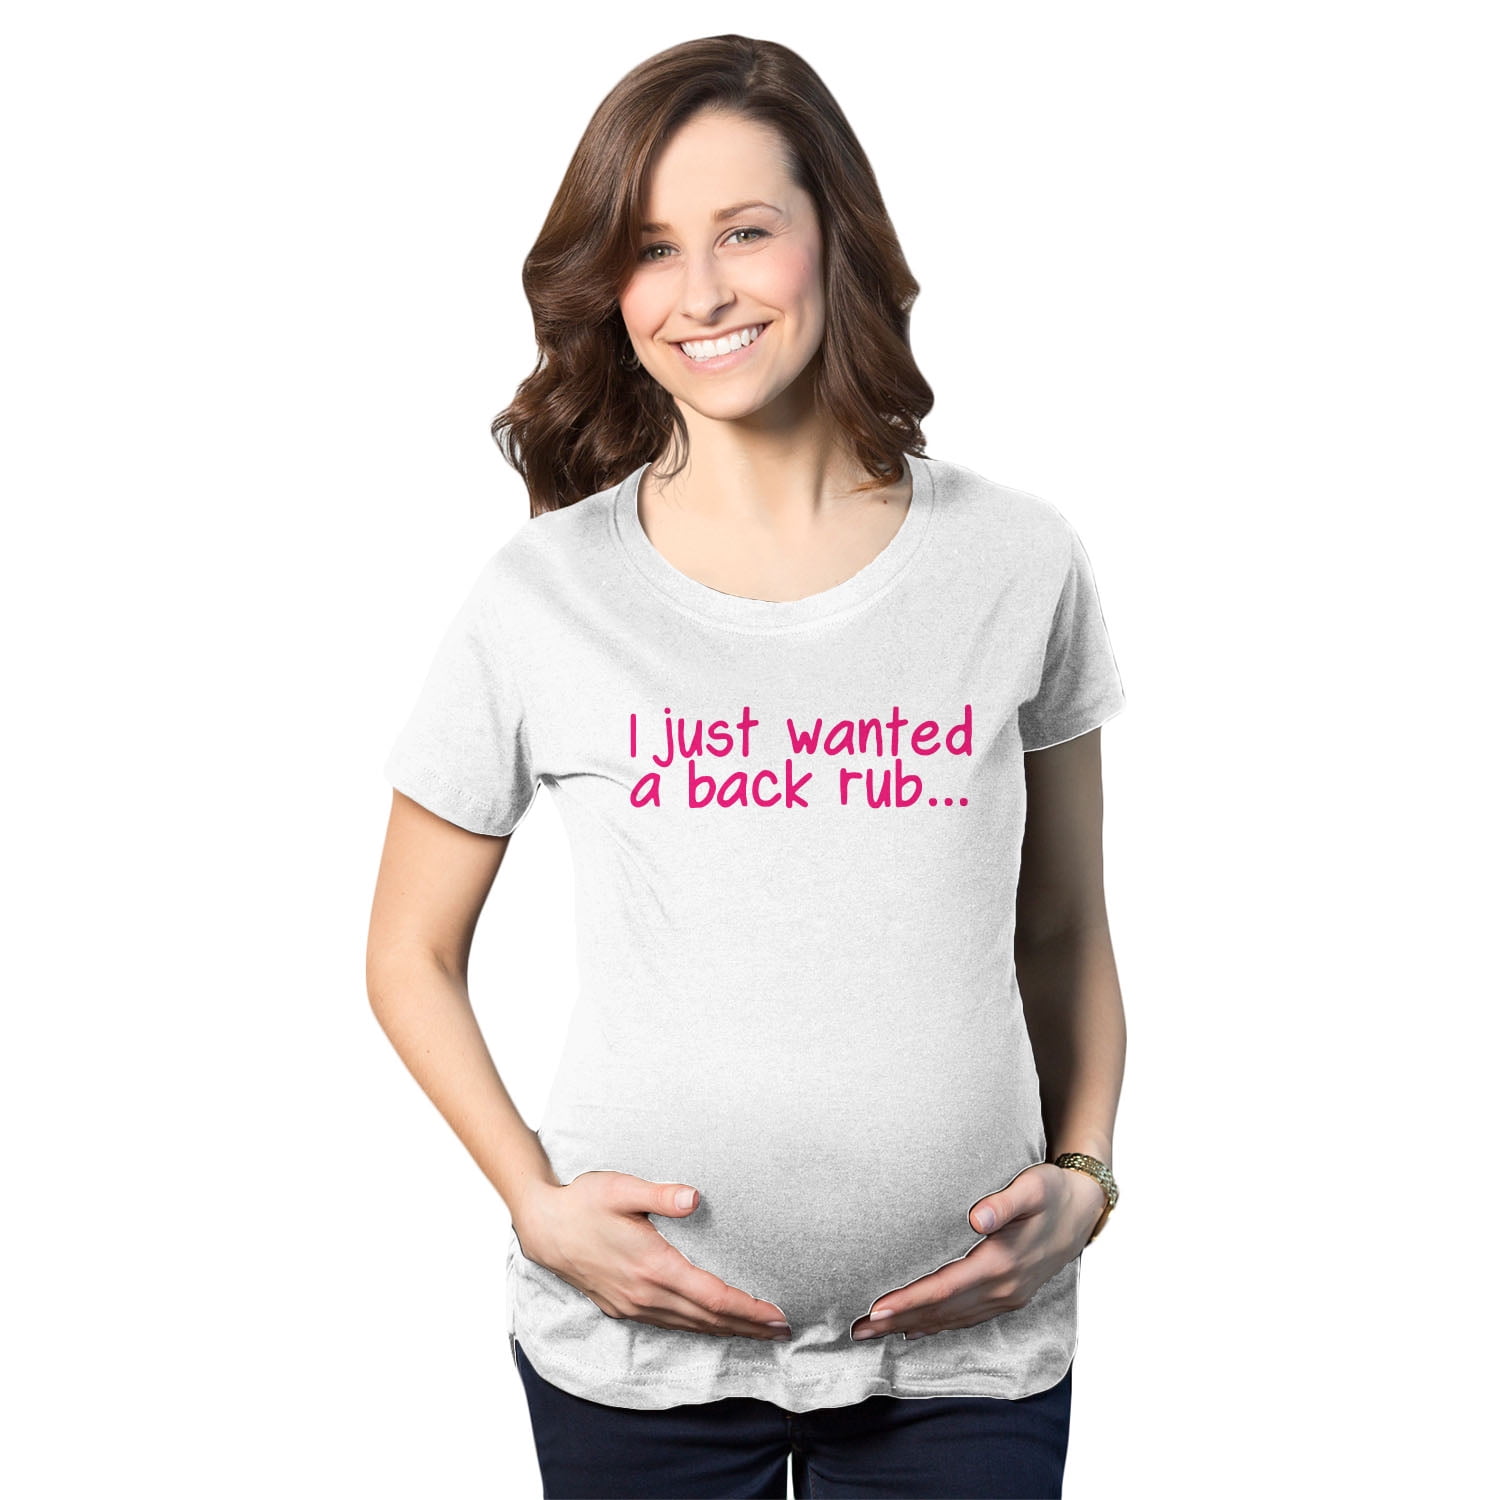 Maternity I Just Wanted A Back Rub Funny T shirts Pregnancy Tees for Women  (White) - M 